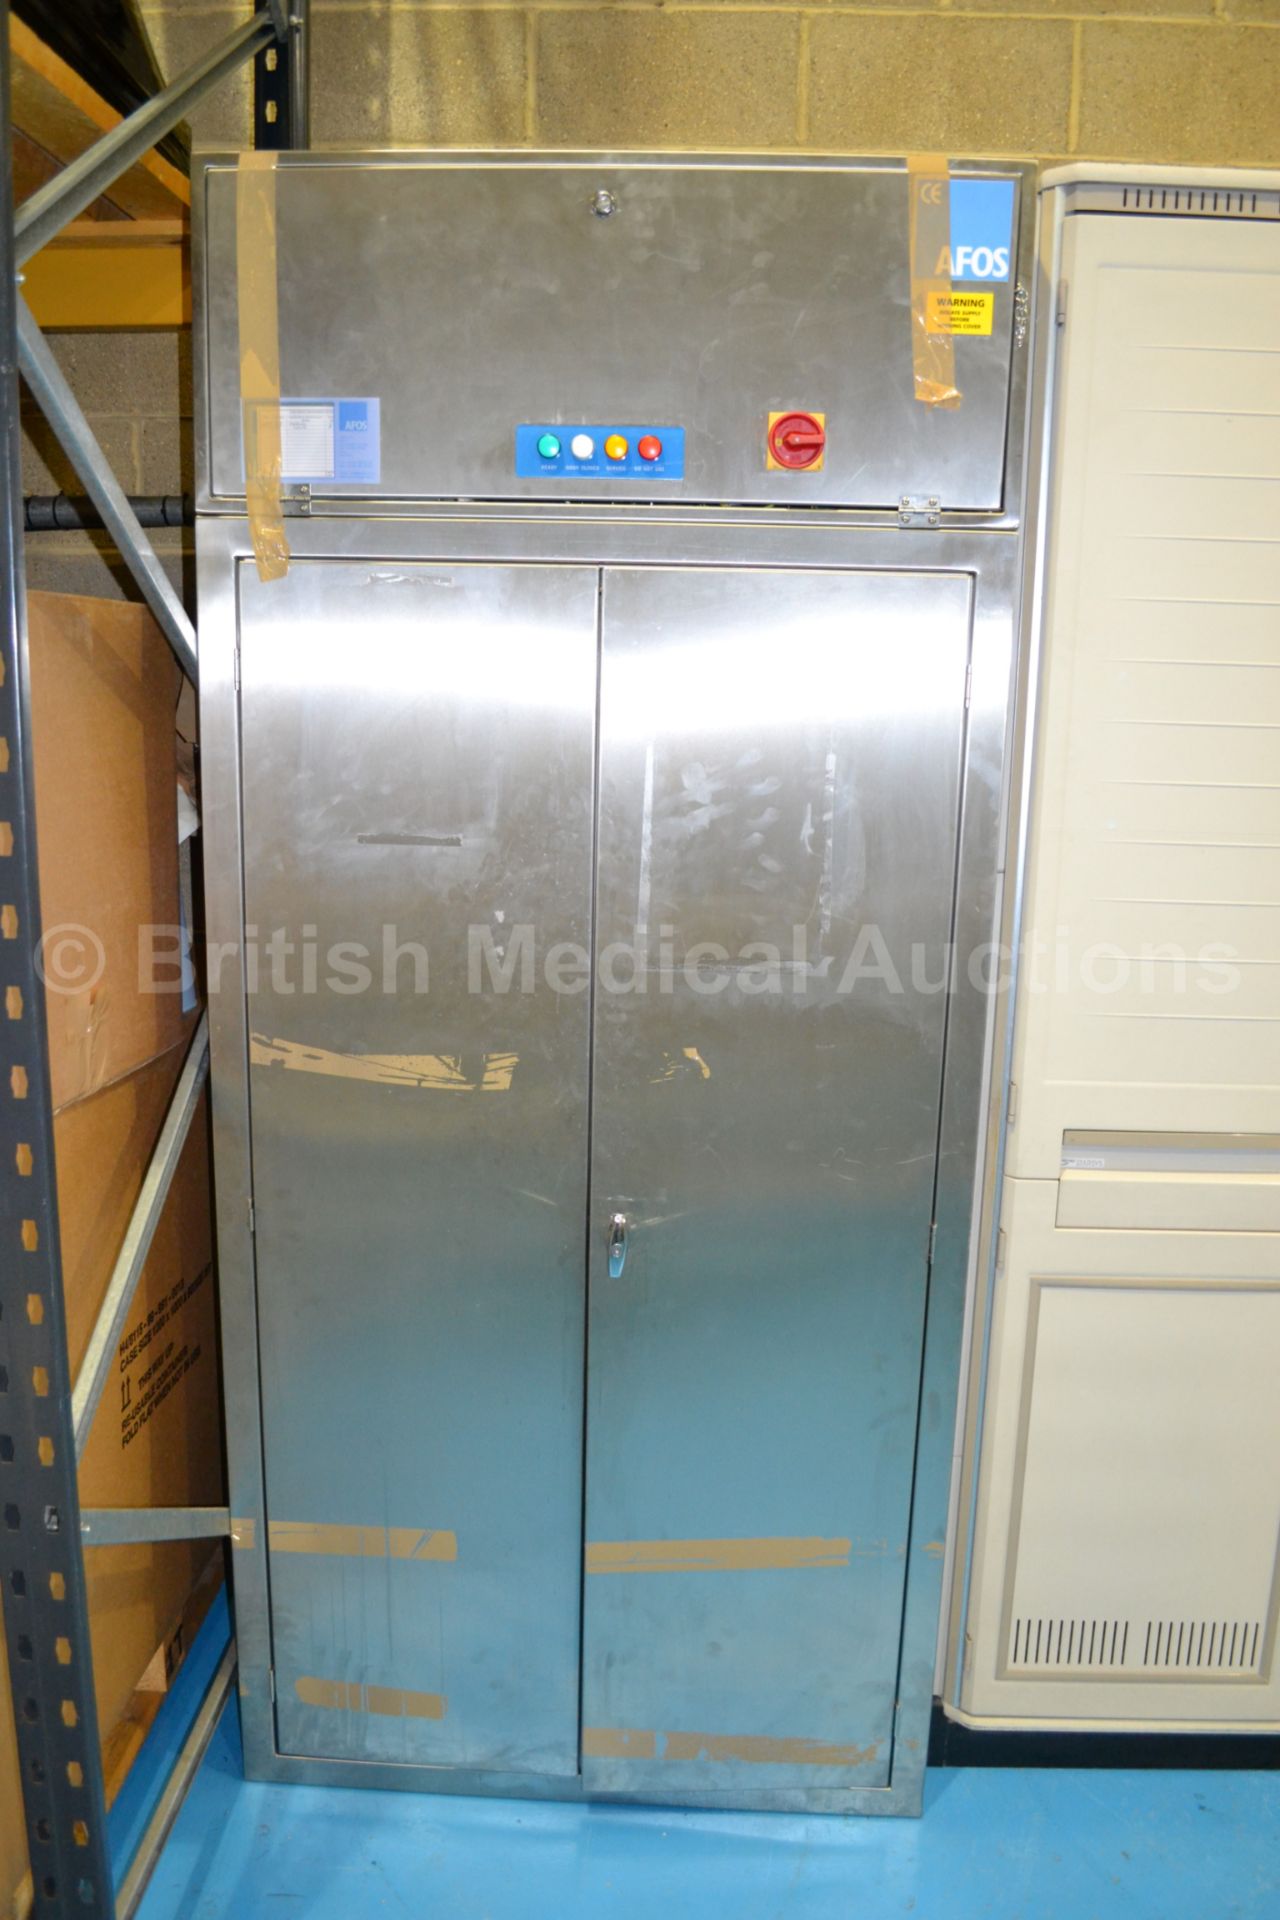 AFOS Endoscope Cabinet and Metro Starsys Endoscope - Image 4 of 5